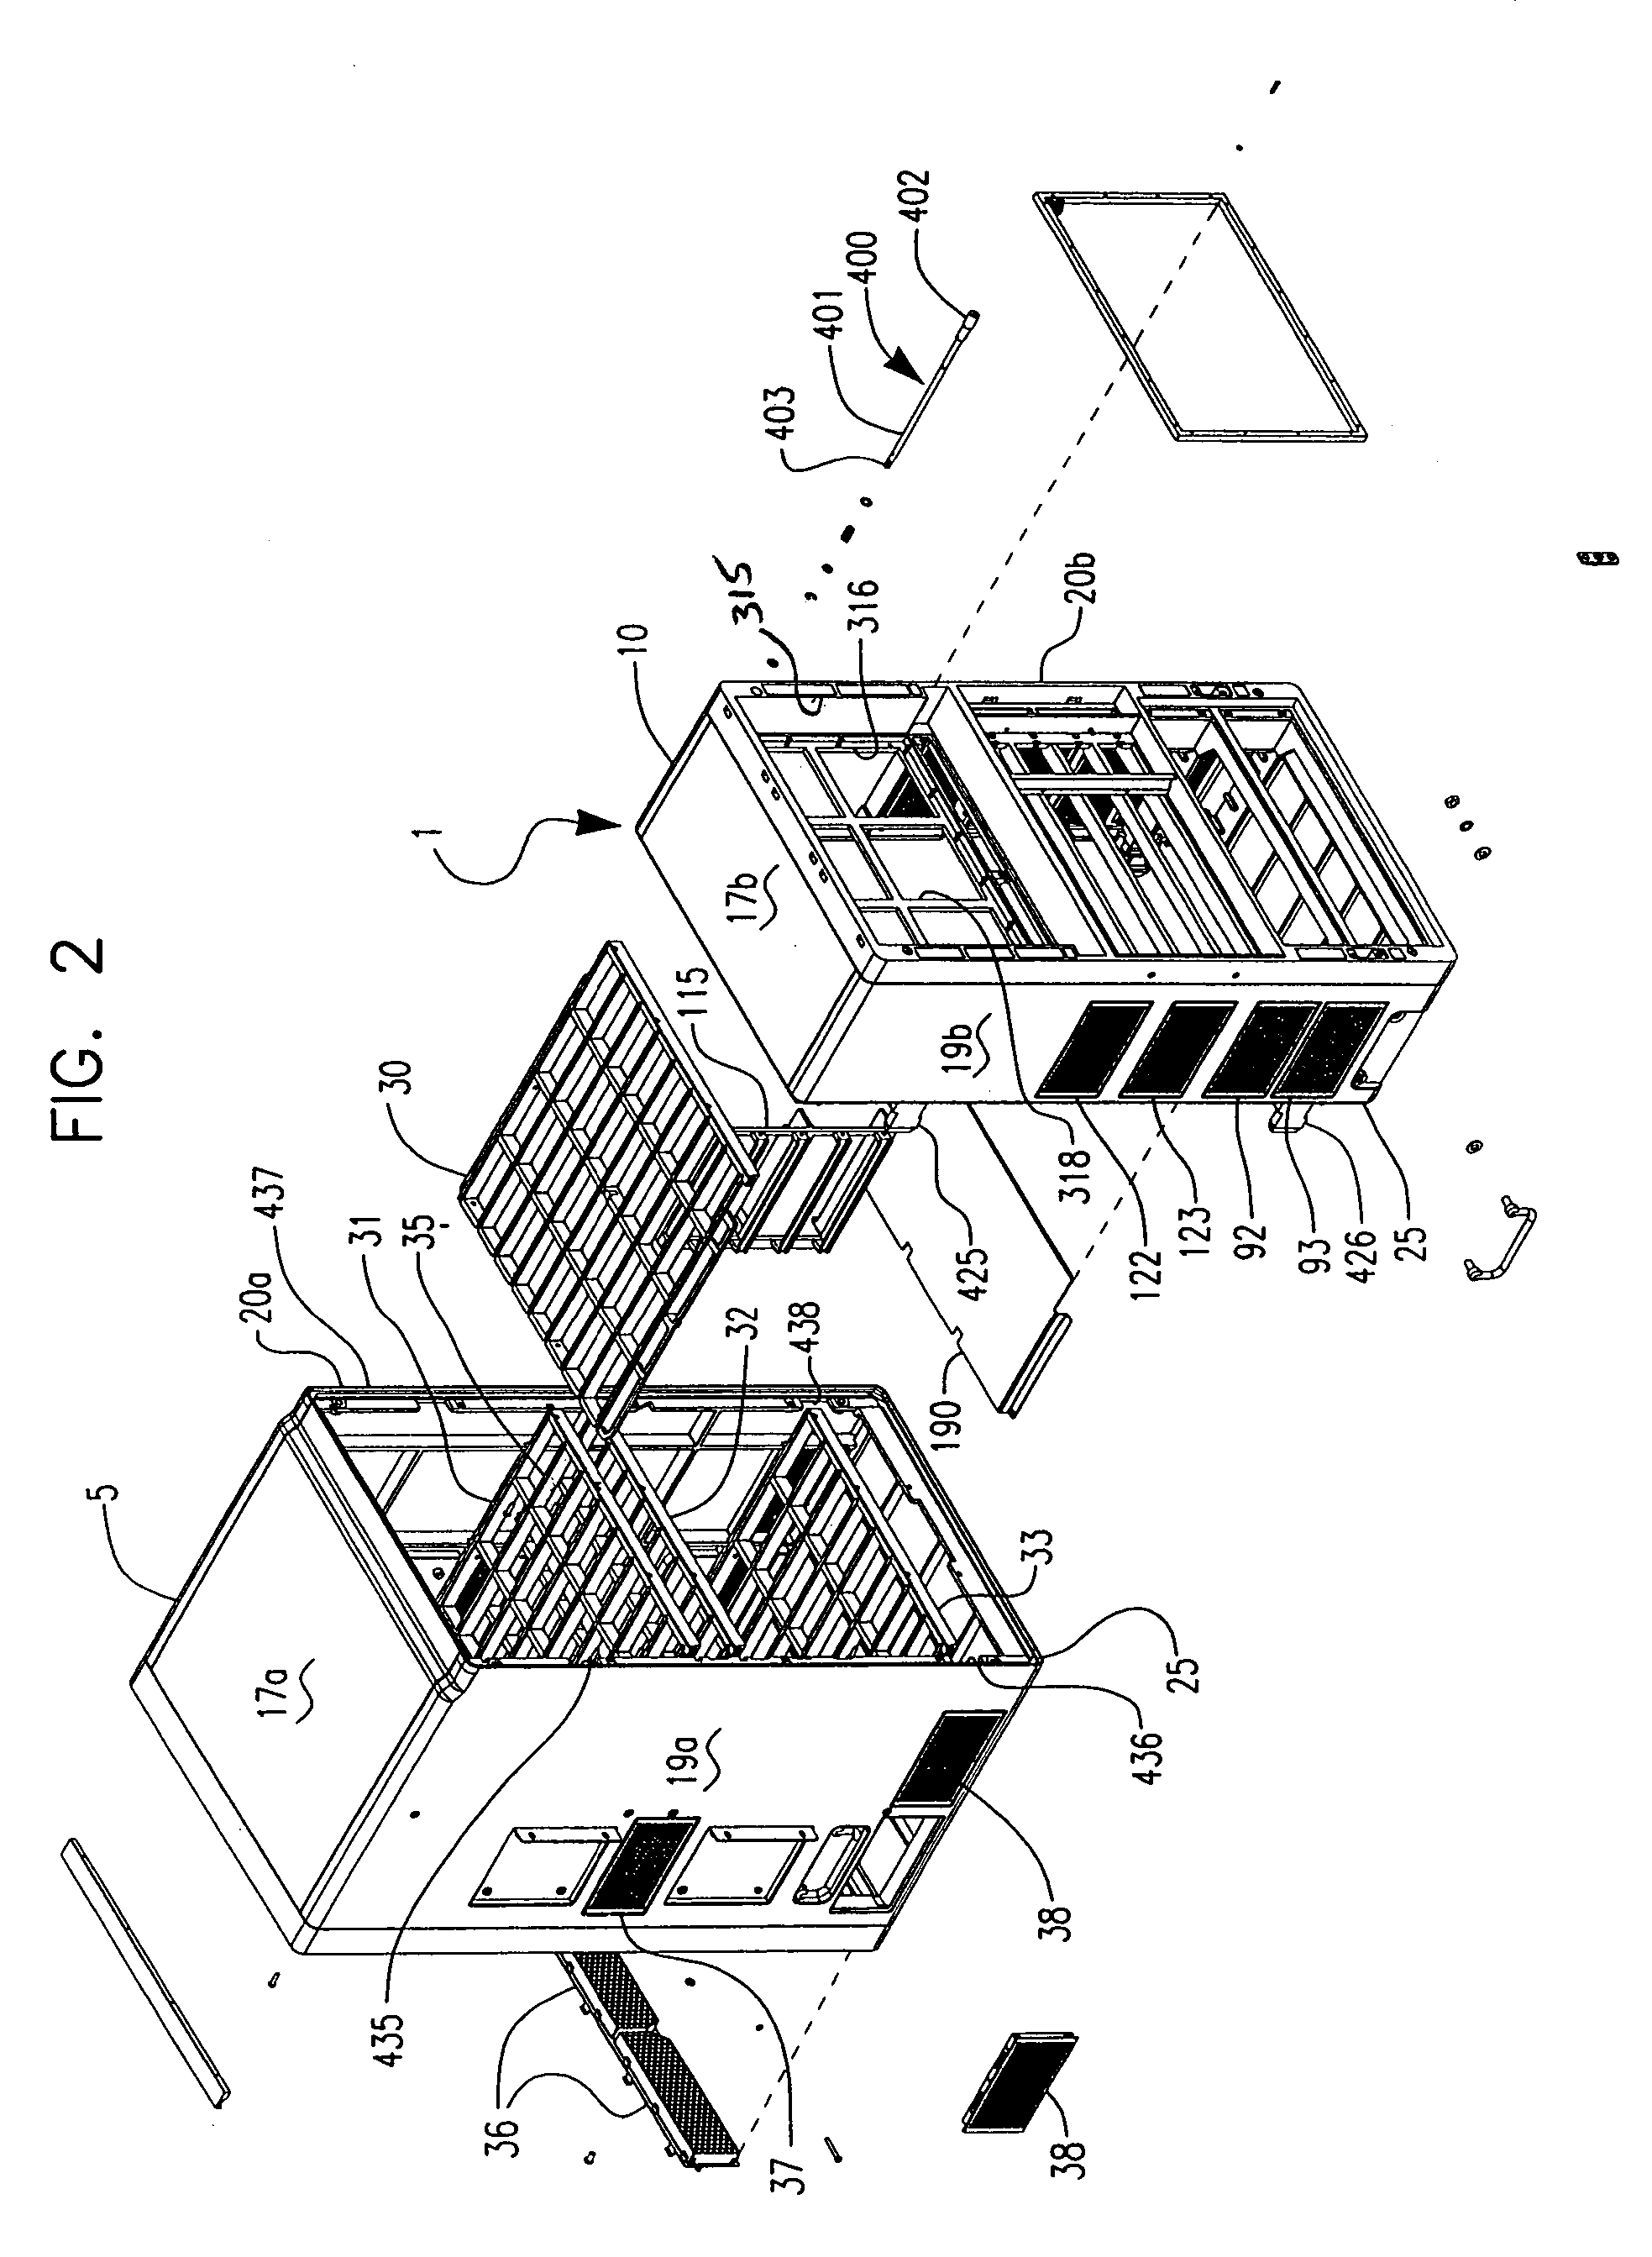 Modular chassis divided along a midplane and cooling system therefor